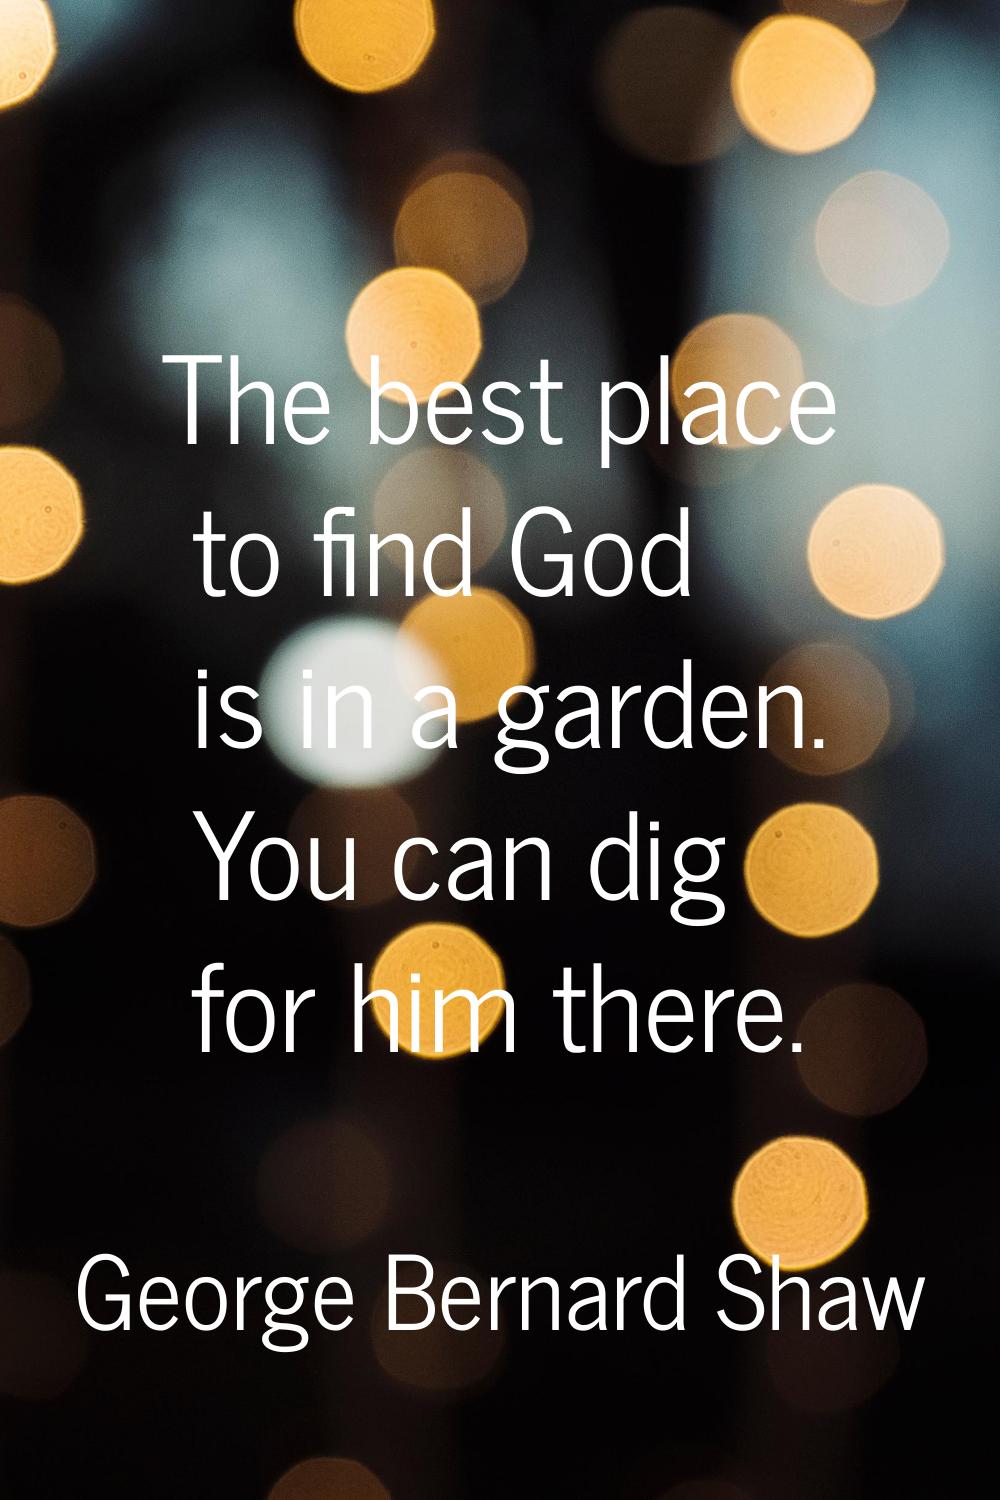 The best place to find God is in a garden. You can dig for him there.